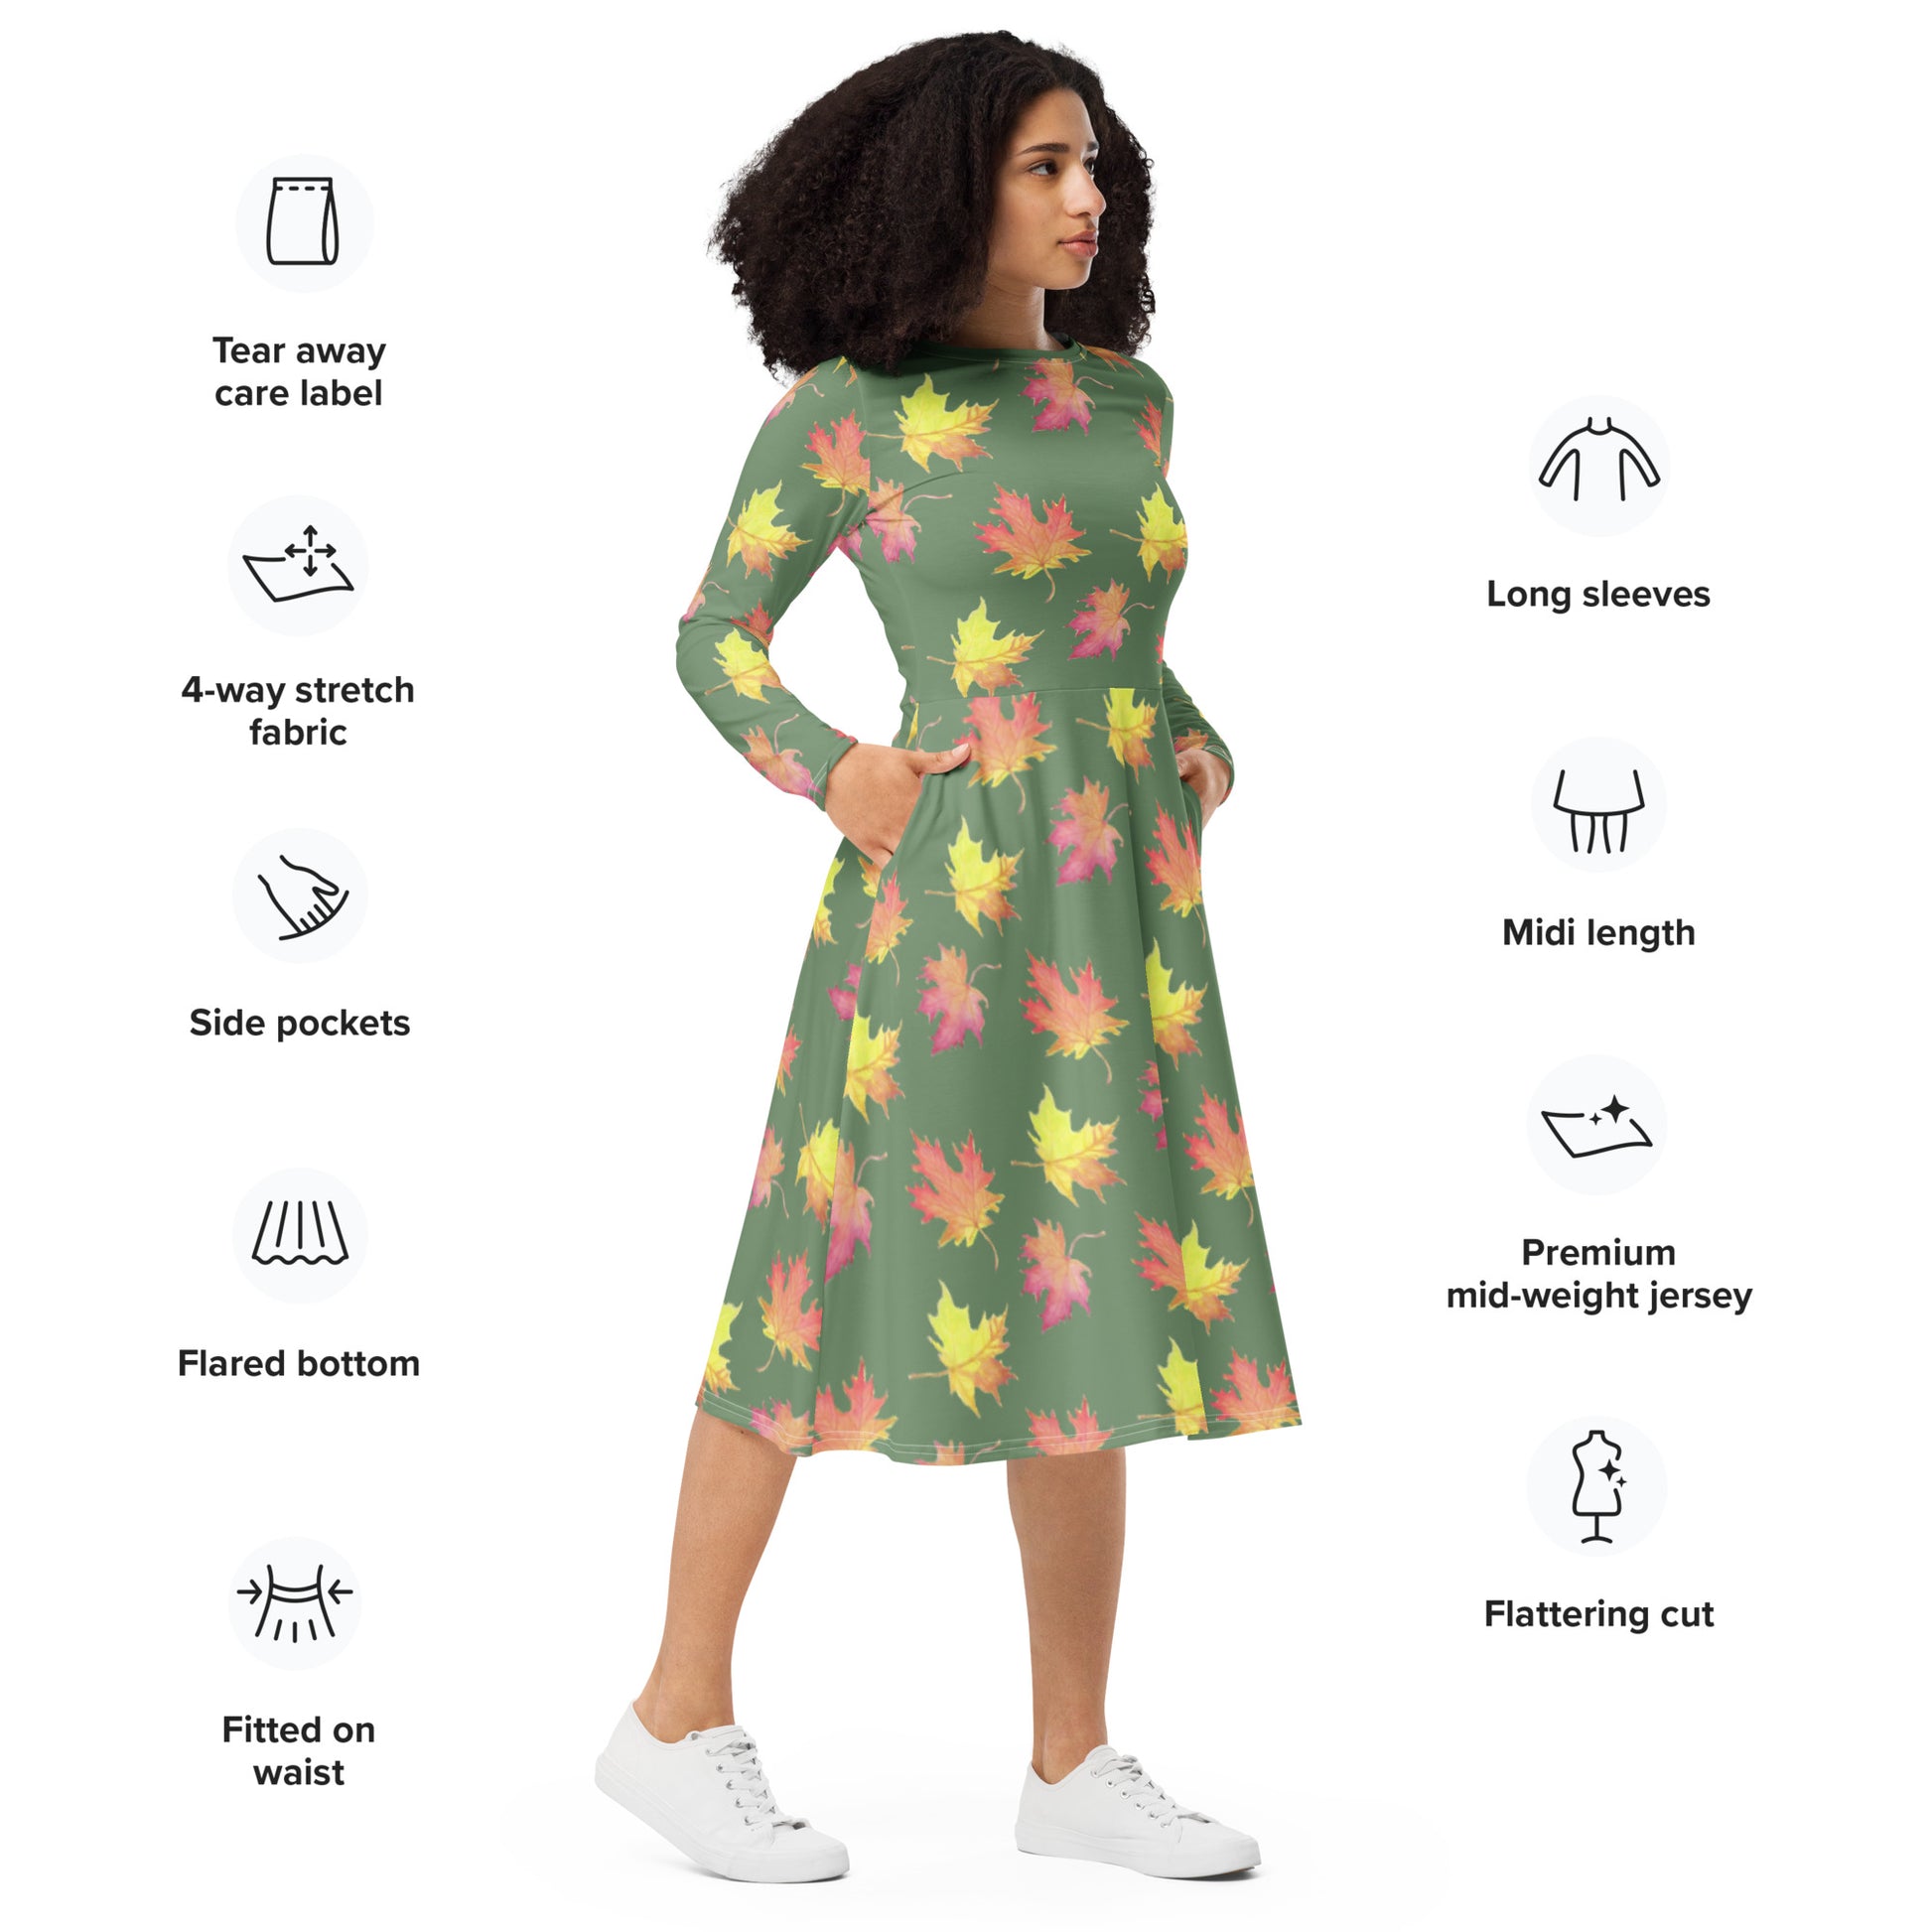 Long sleeve midi dress. Watercolor fall leaves patterned over an amulet green background. Soft and flattering fit. Boatline neck, fitted waist, flared bottom, and side pockets. Shown on female model with hands in her pockets.